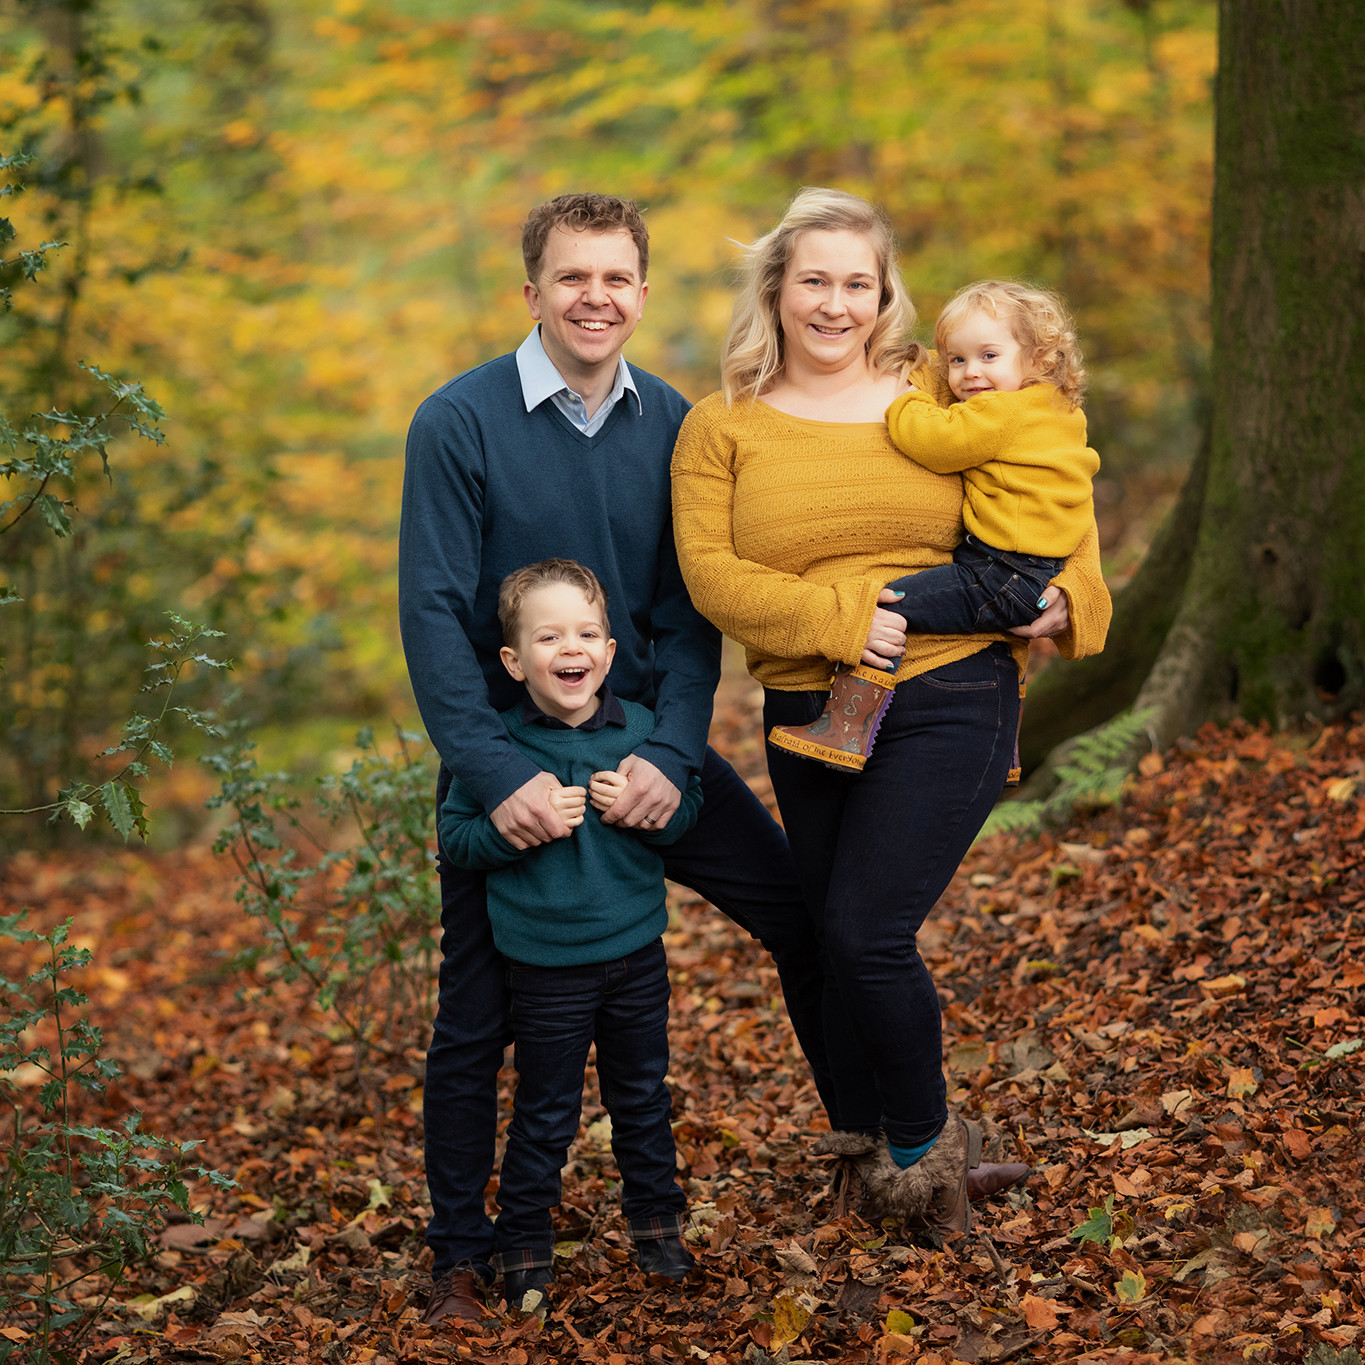 autumn family portrait outdoors on location by Family photographer Lancashire